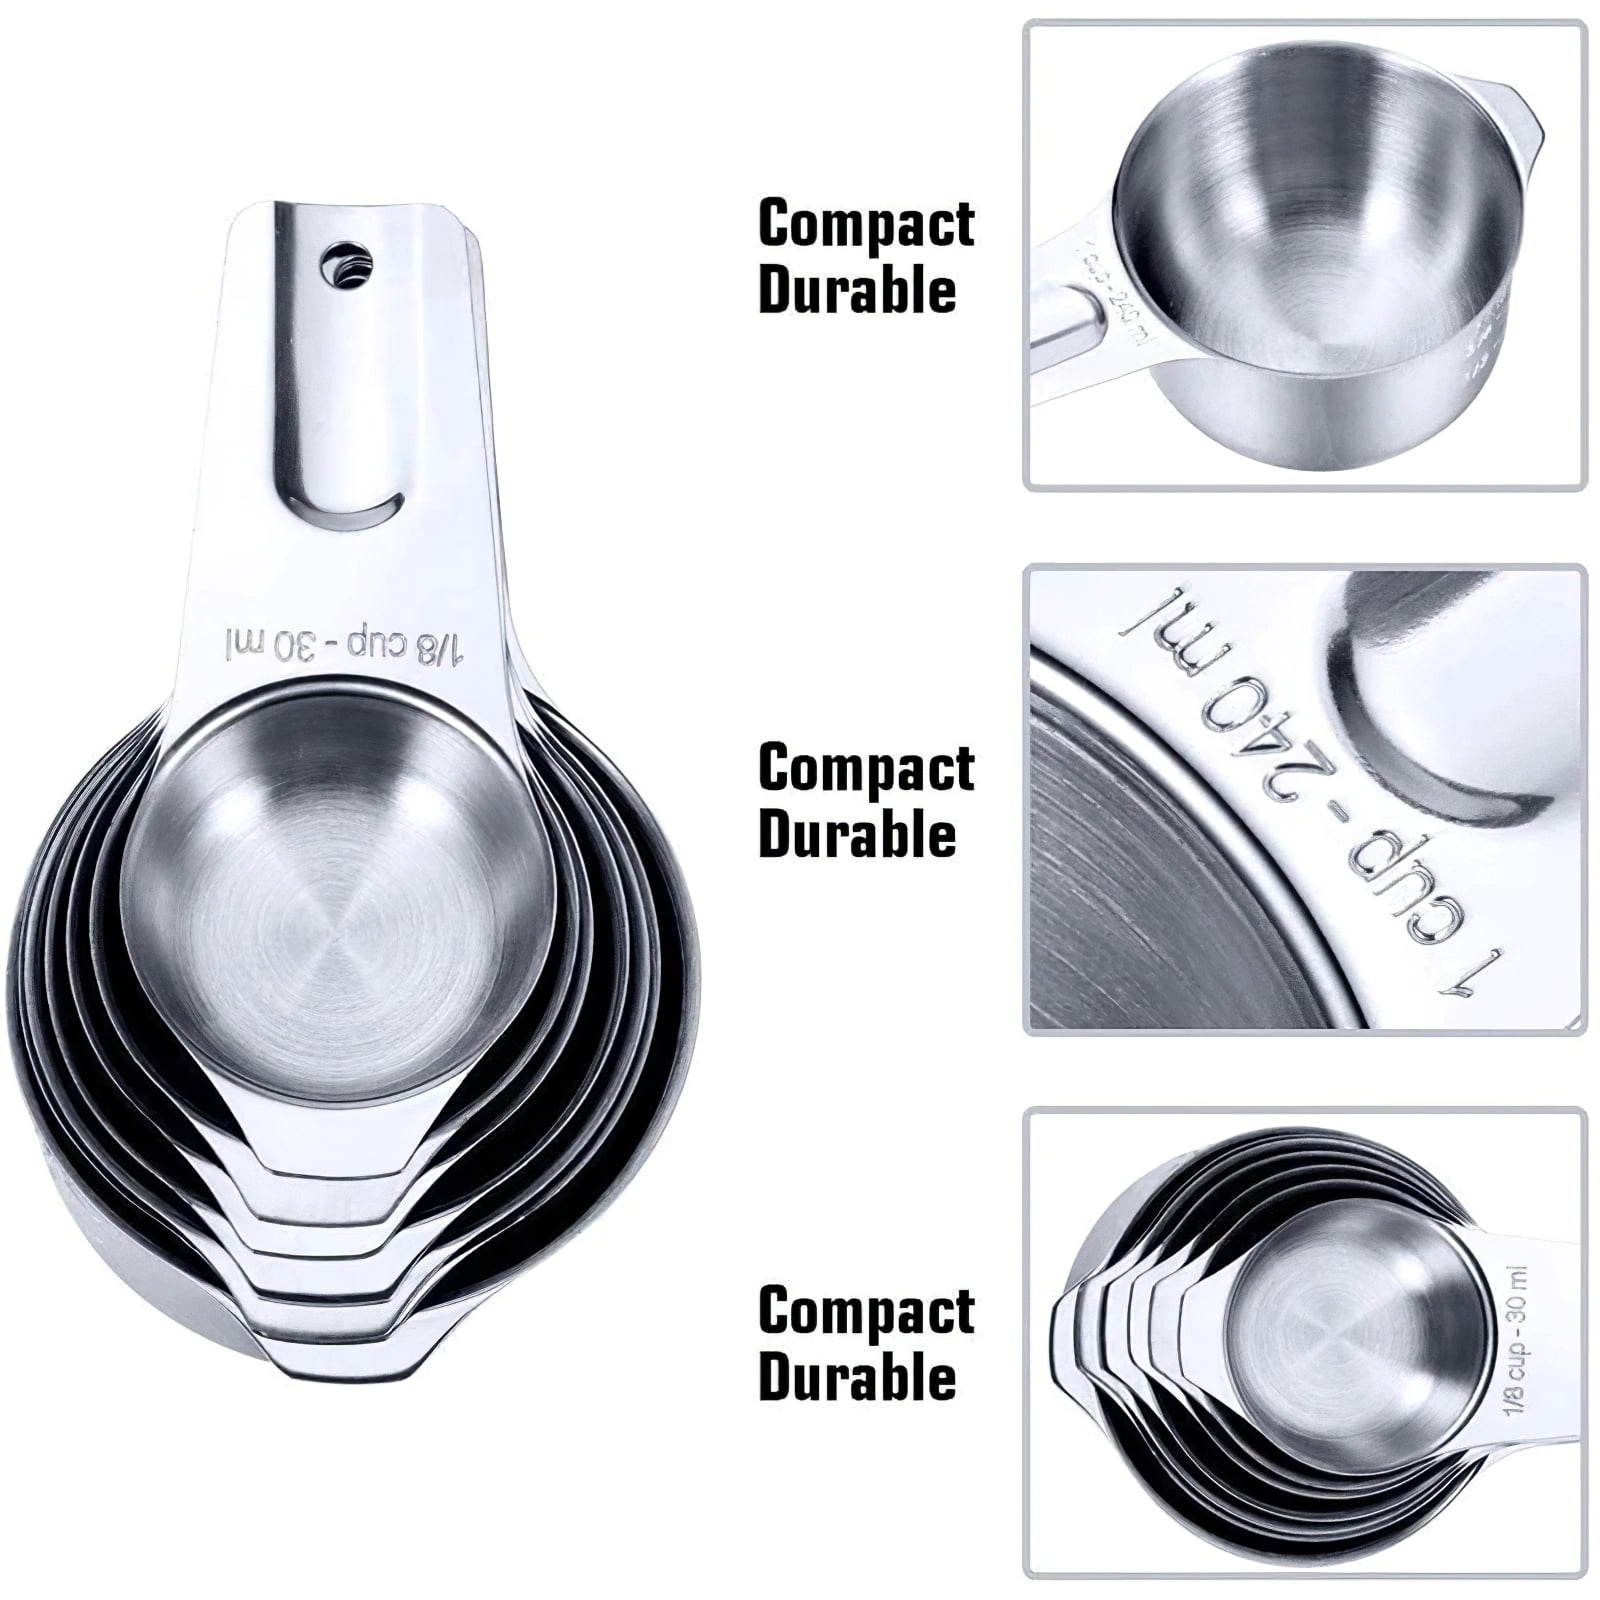 Stainless Steel Measuring Cups and Spoons Set: 7 Cup and 7 Spoon Metal Measure  Sets of 16 Piece for Dry & Liquid Measurement – Kitchen Gadgets & Utensils  for Cooking Food 